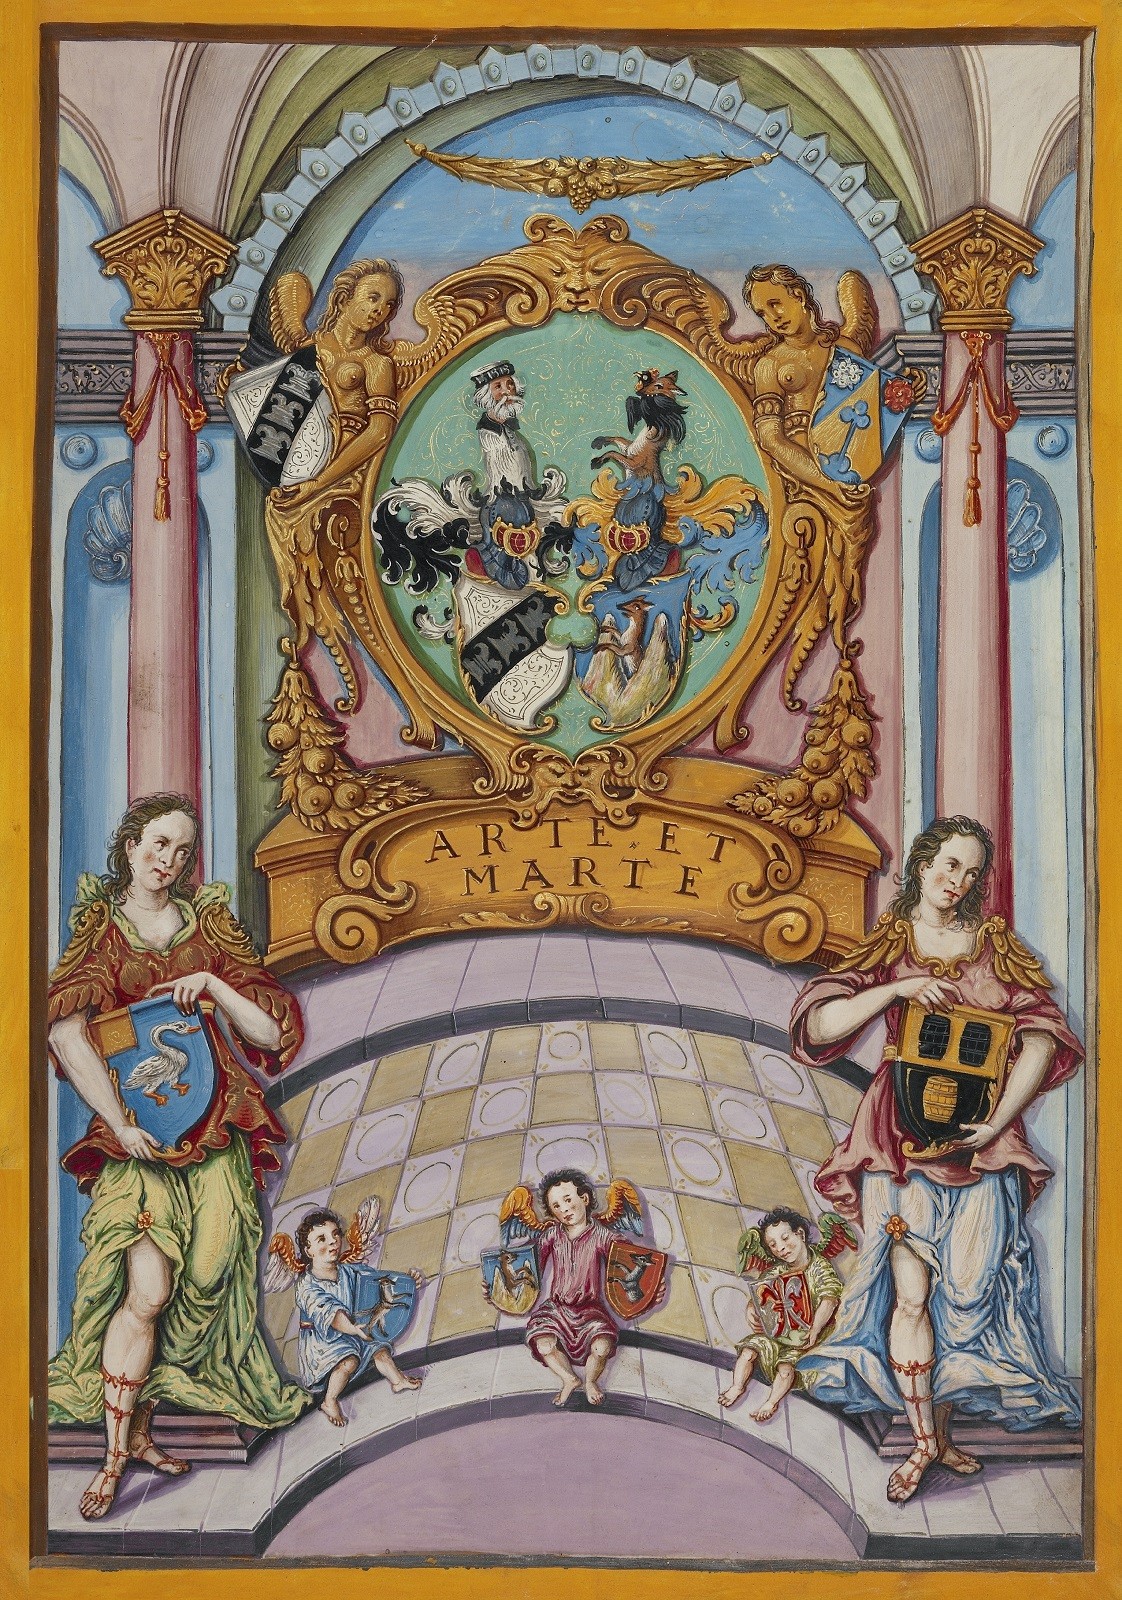 Second Frontispiece with the Derrer Coat of Arms, c.1626, Tempera colors, gold and silver highlights on parchment